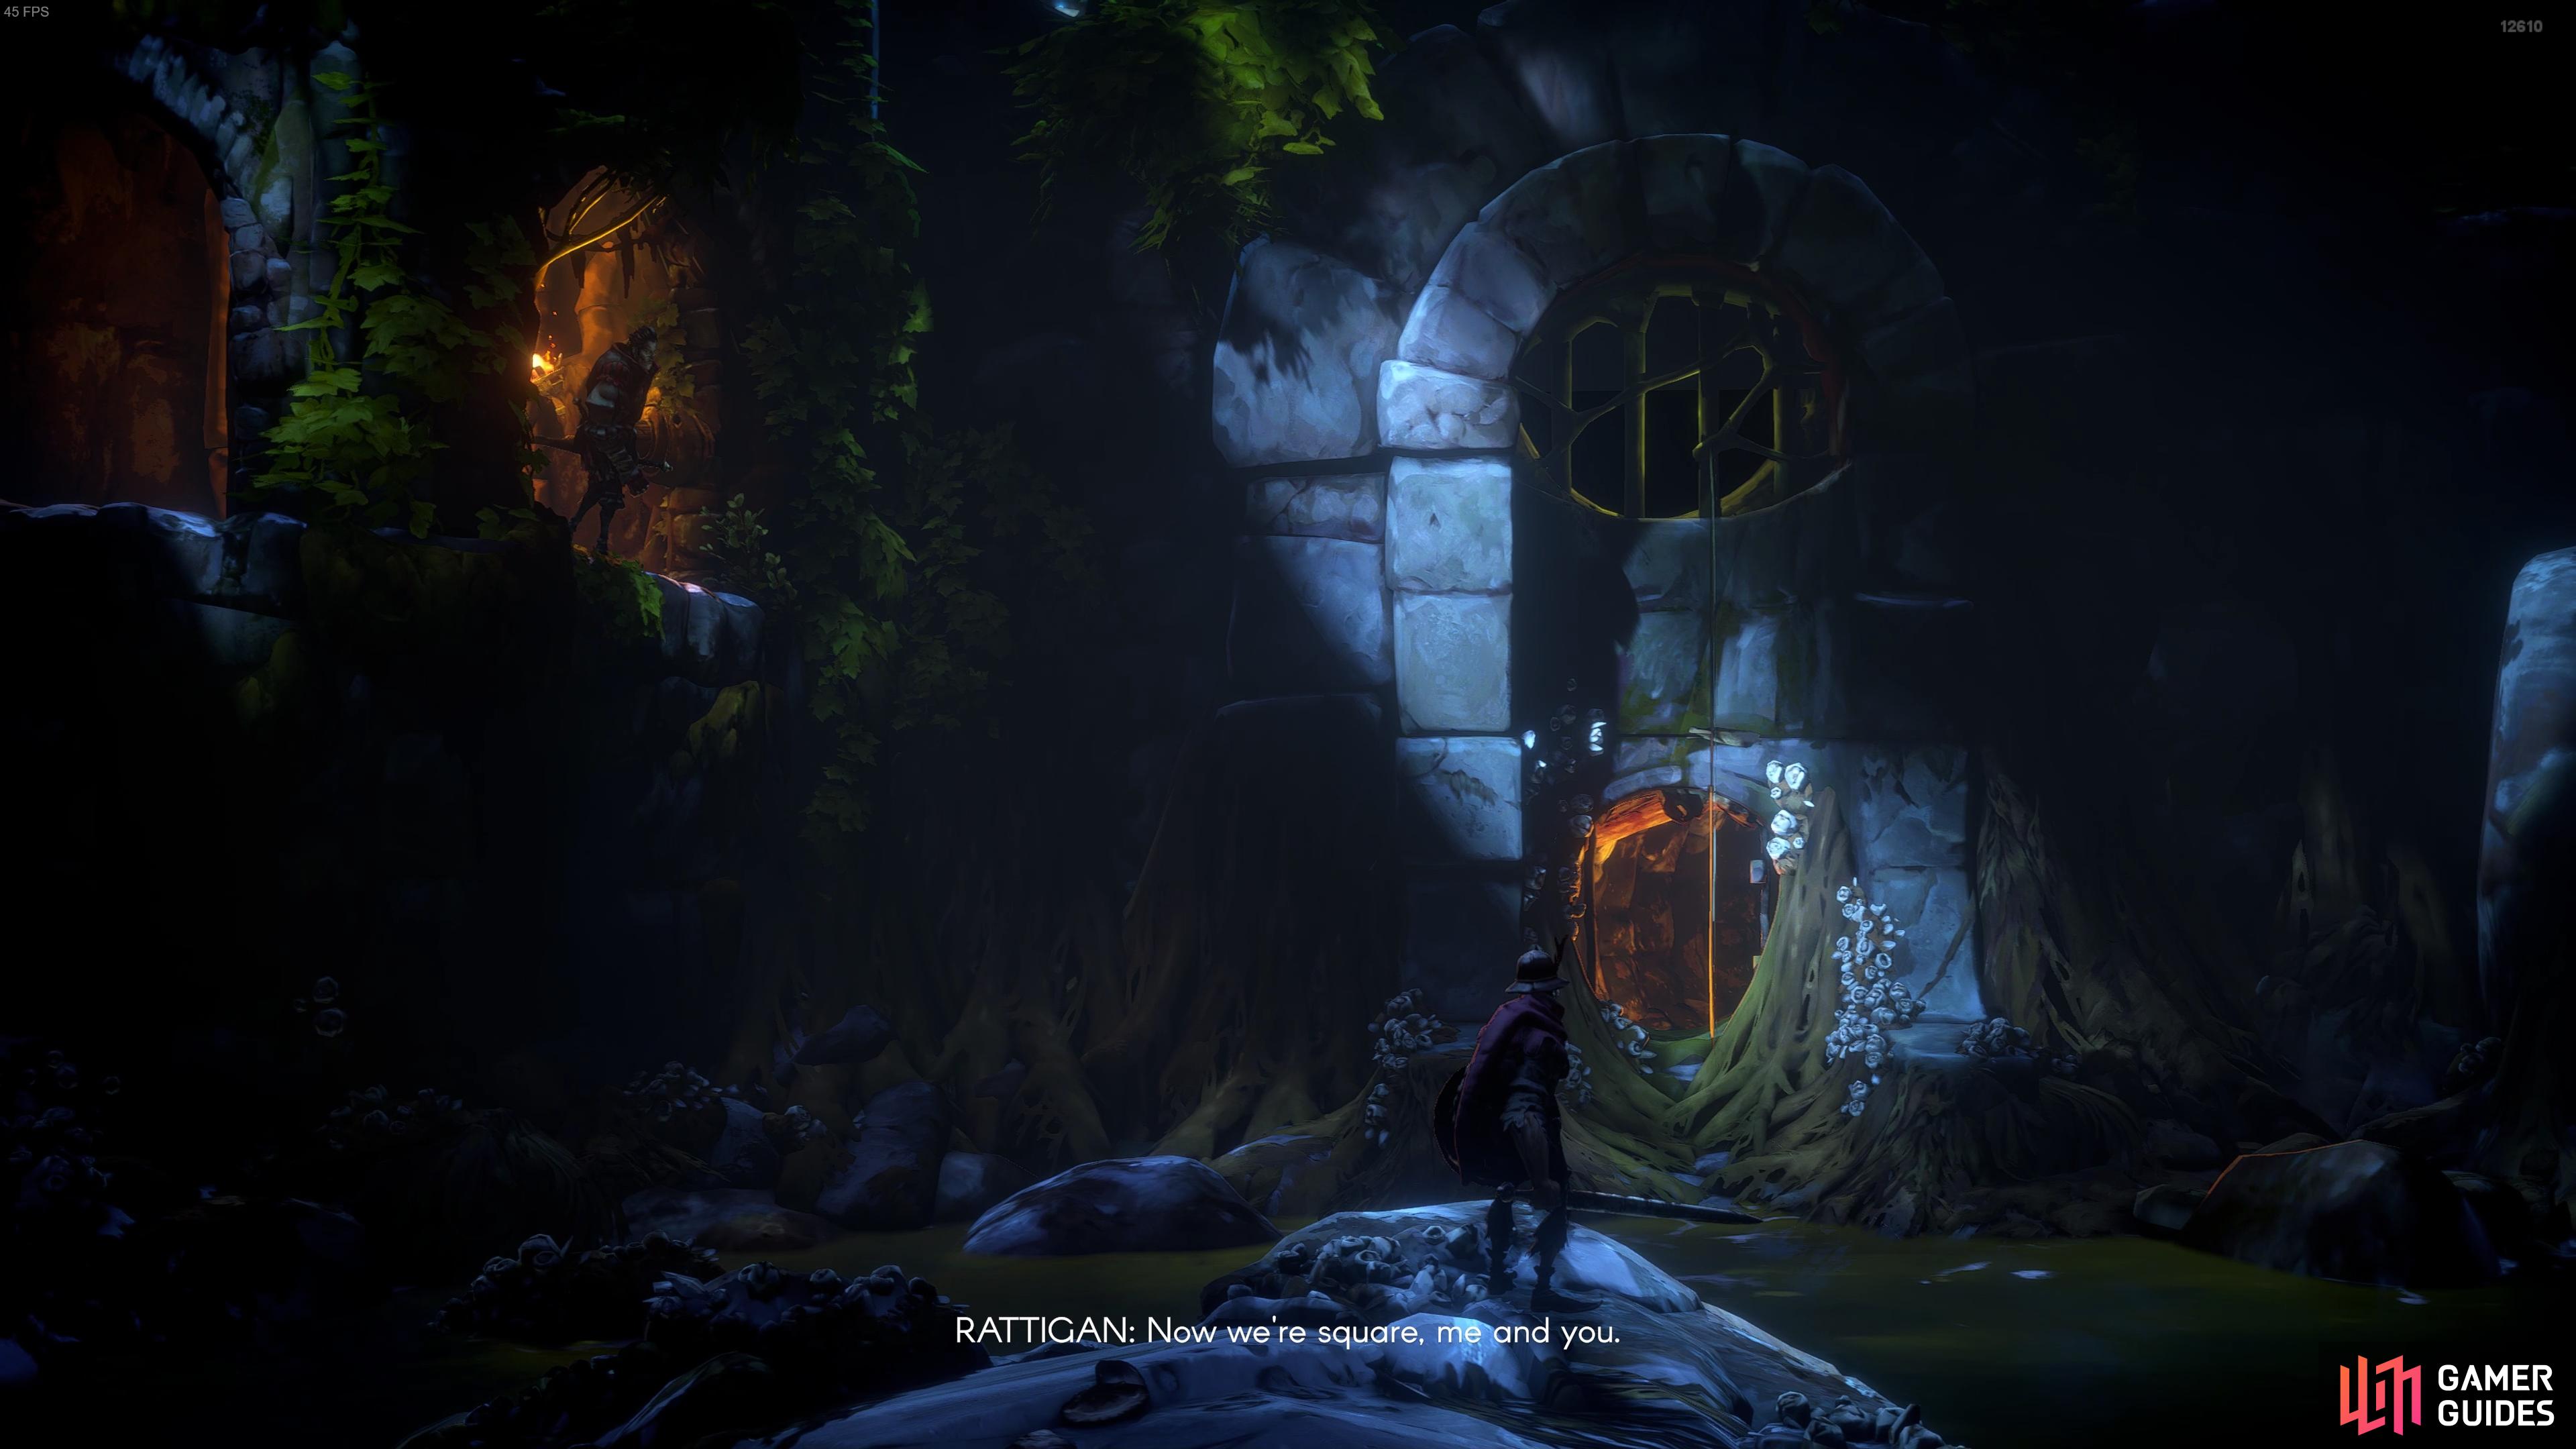 Rattigan will reveal the entrance to the sewers where you can find Darak.